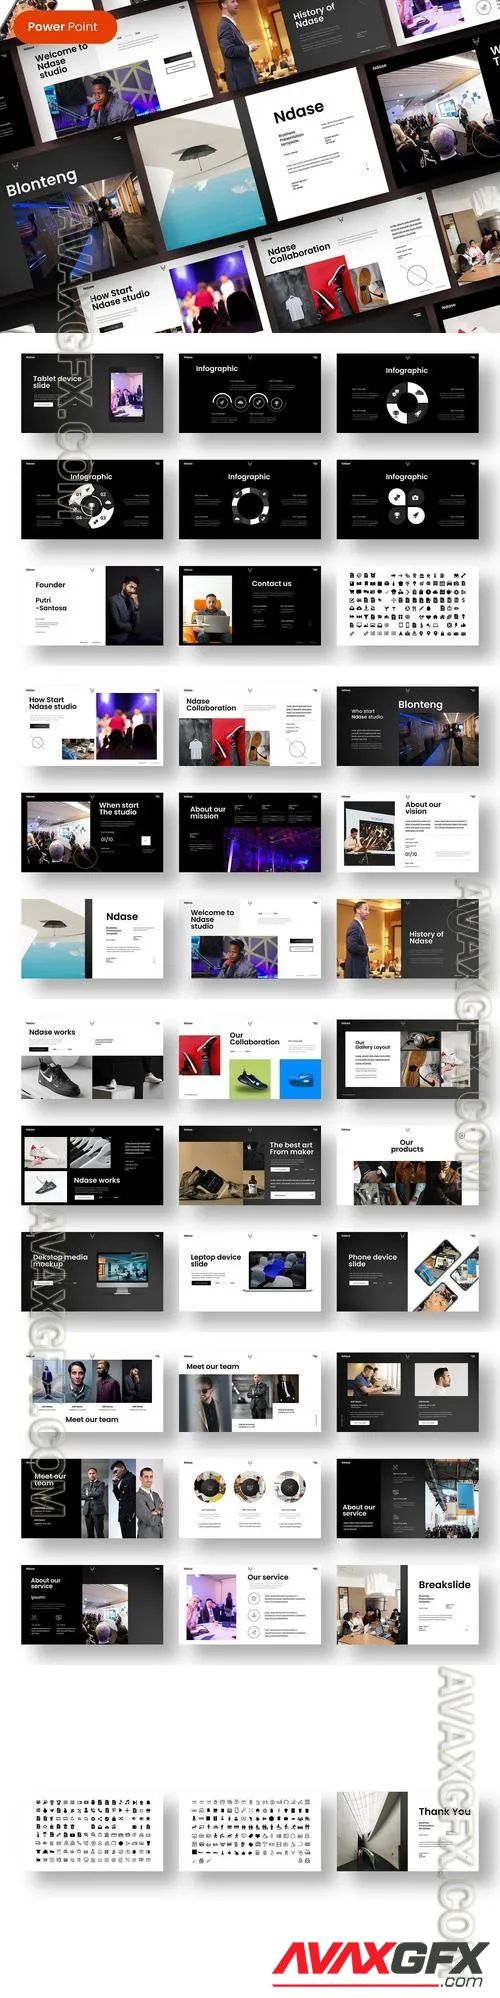 Ndase - Business PowerPoint Template